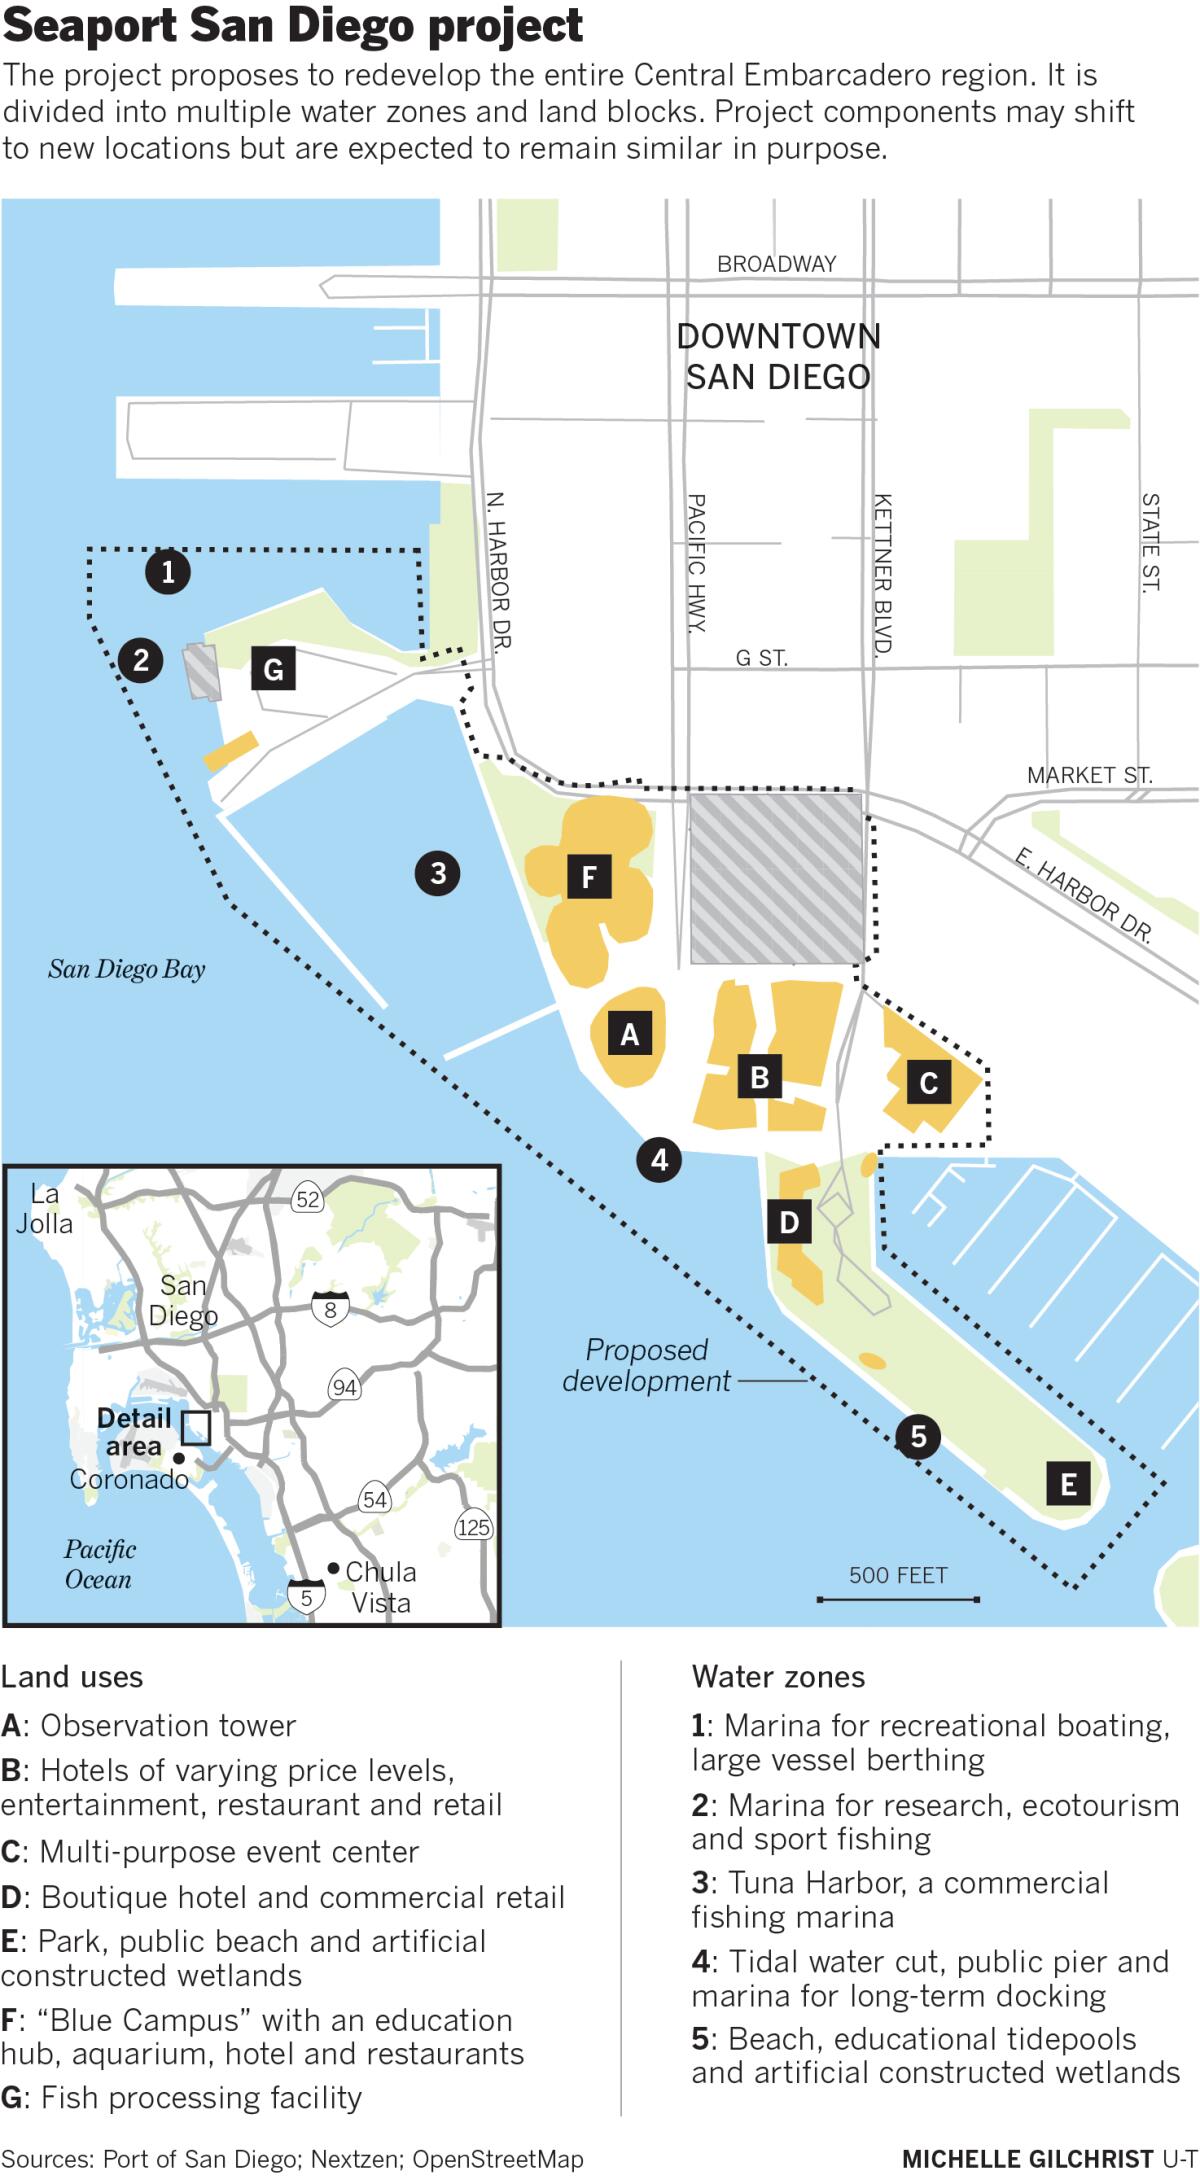 What's happening with Seaport San Diego, the $2.5B redo of